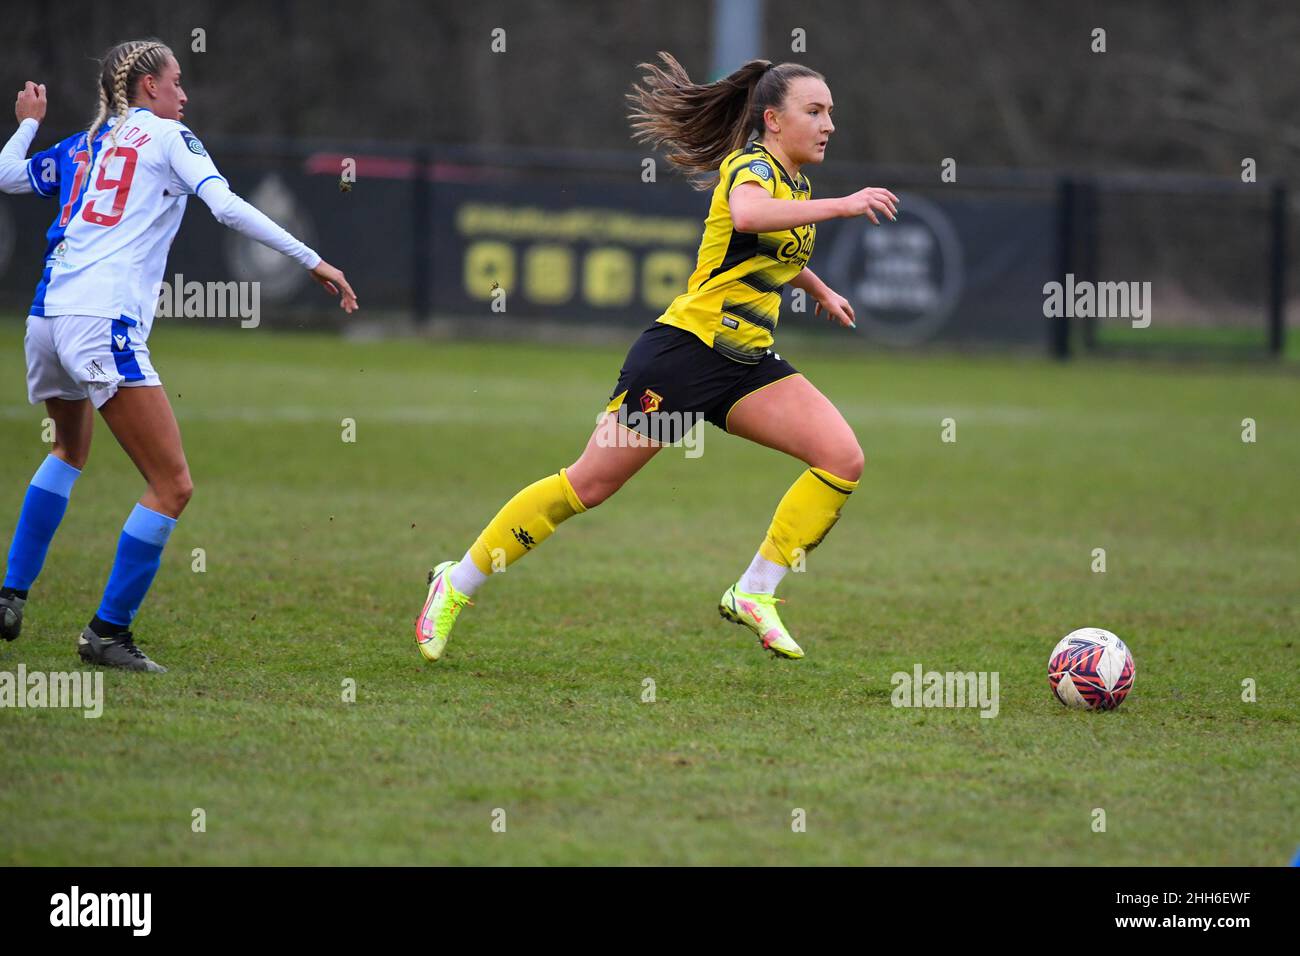 Kings Langley, UK. 23rd January, 2022. Kings Langley Teyah Goldie (23 Watford) during the FA womens Championship game between Watford and Blackburn Rovers - at The Orbital Fasteners Stadium - Kings Langley, England Kevin Hodgson /SPP Credit: SPP Sport Press Photo. /Alamy Live News Stock Photo